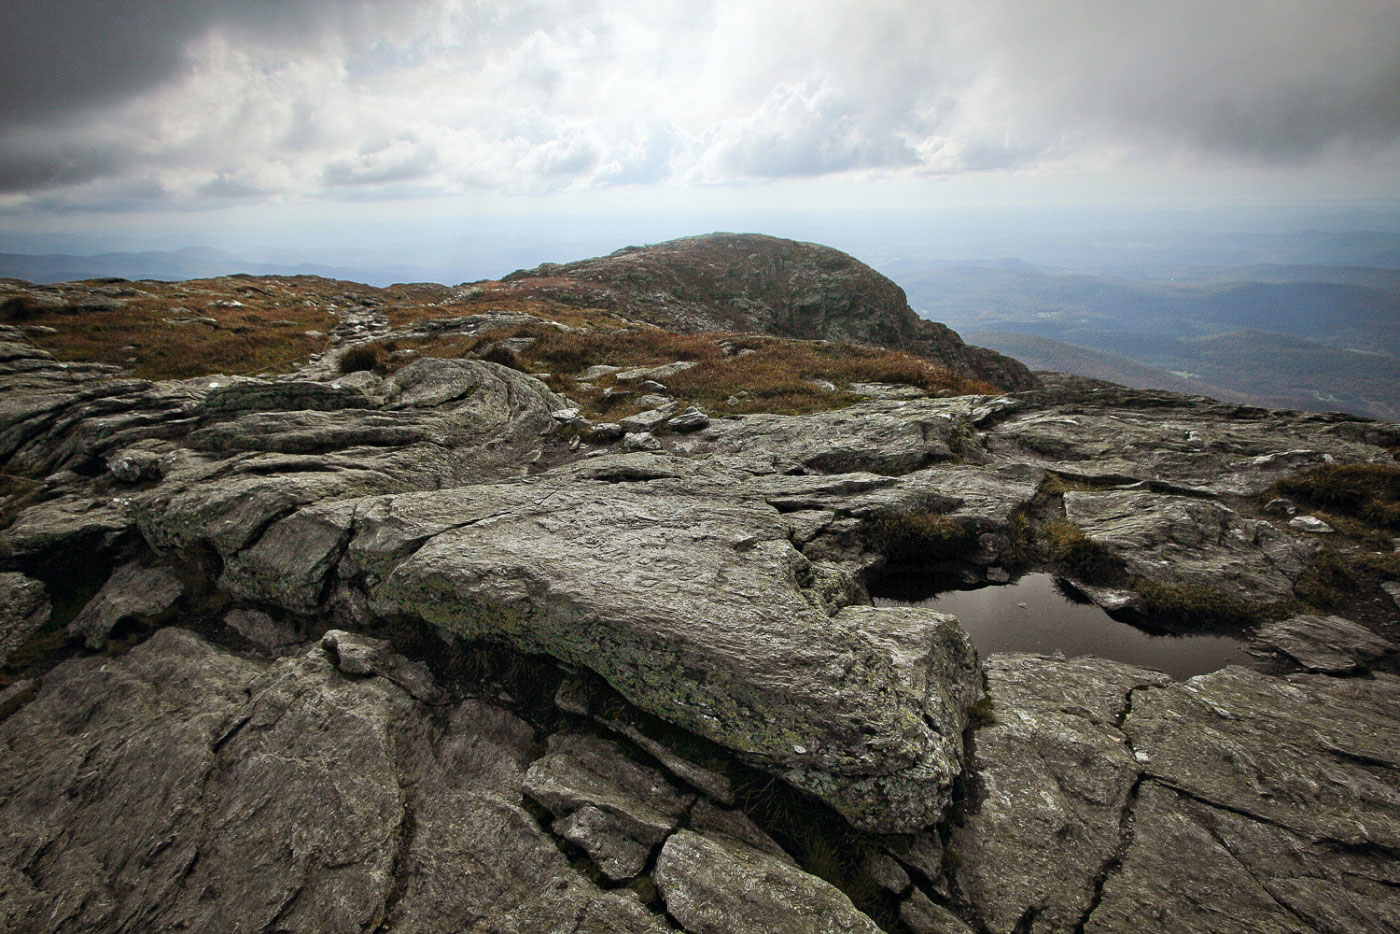 Hike Mount Mansfield via Laura Cowles and Sunset Ridge in Mt. Mansfield State Park, Vermont - Stav is Lost